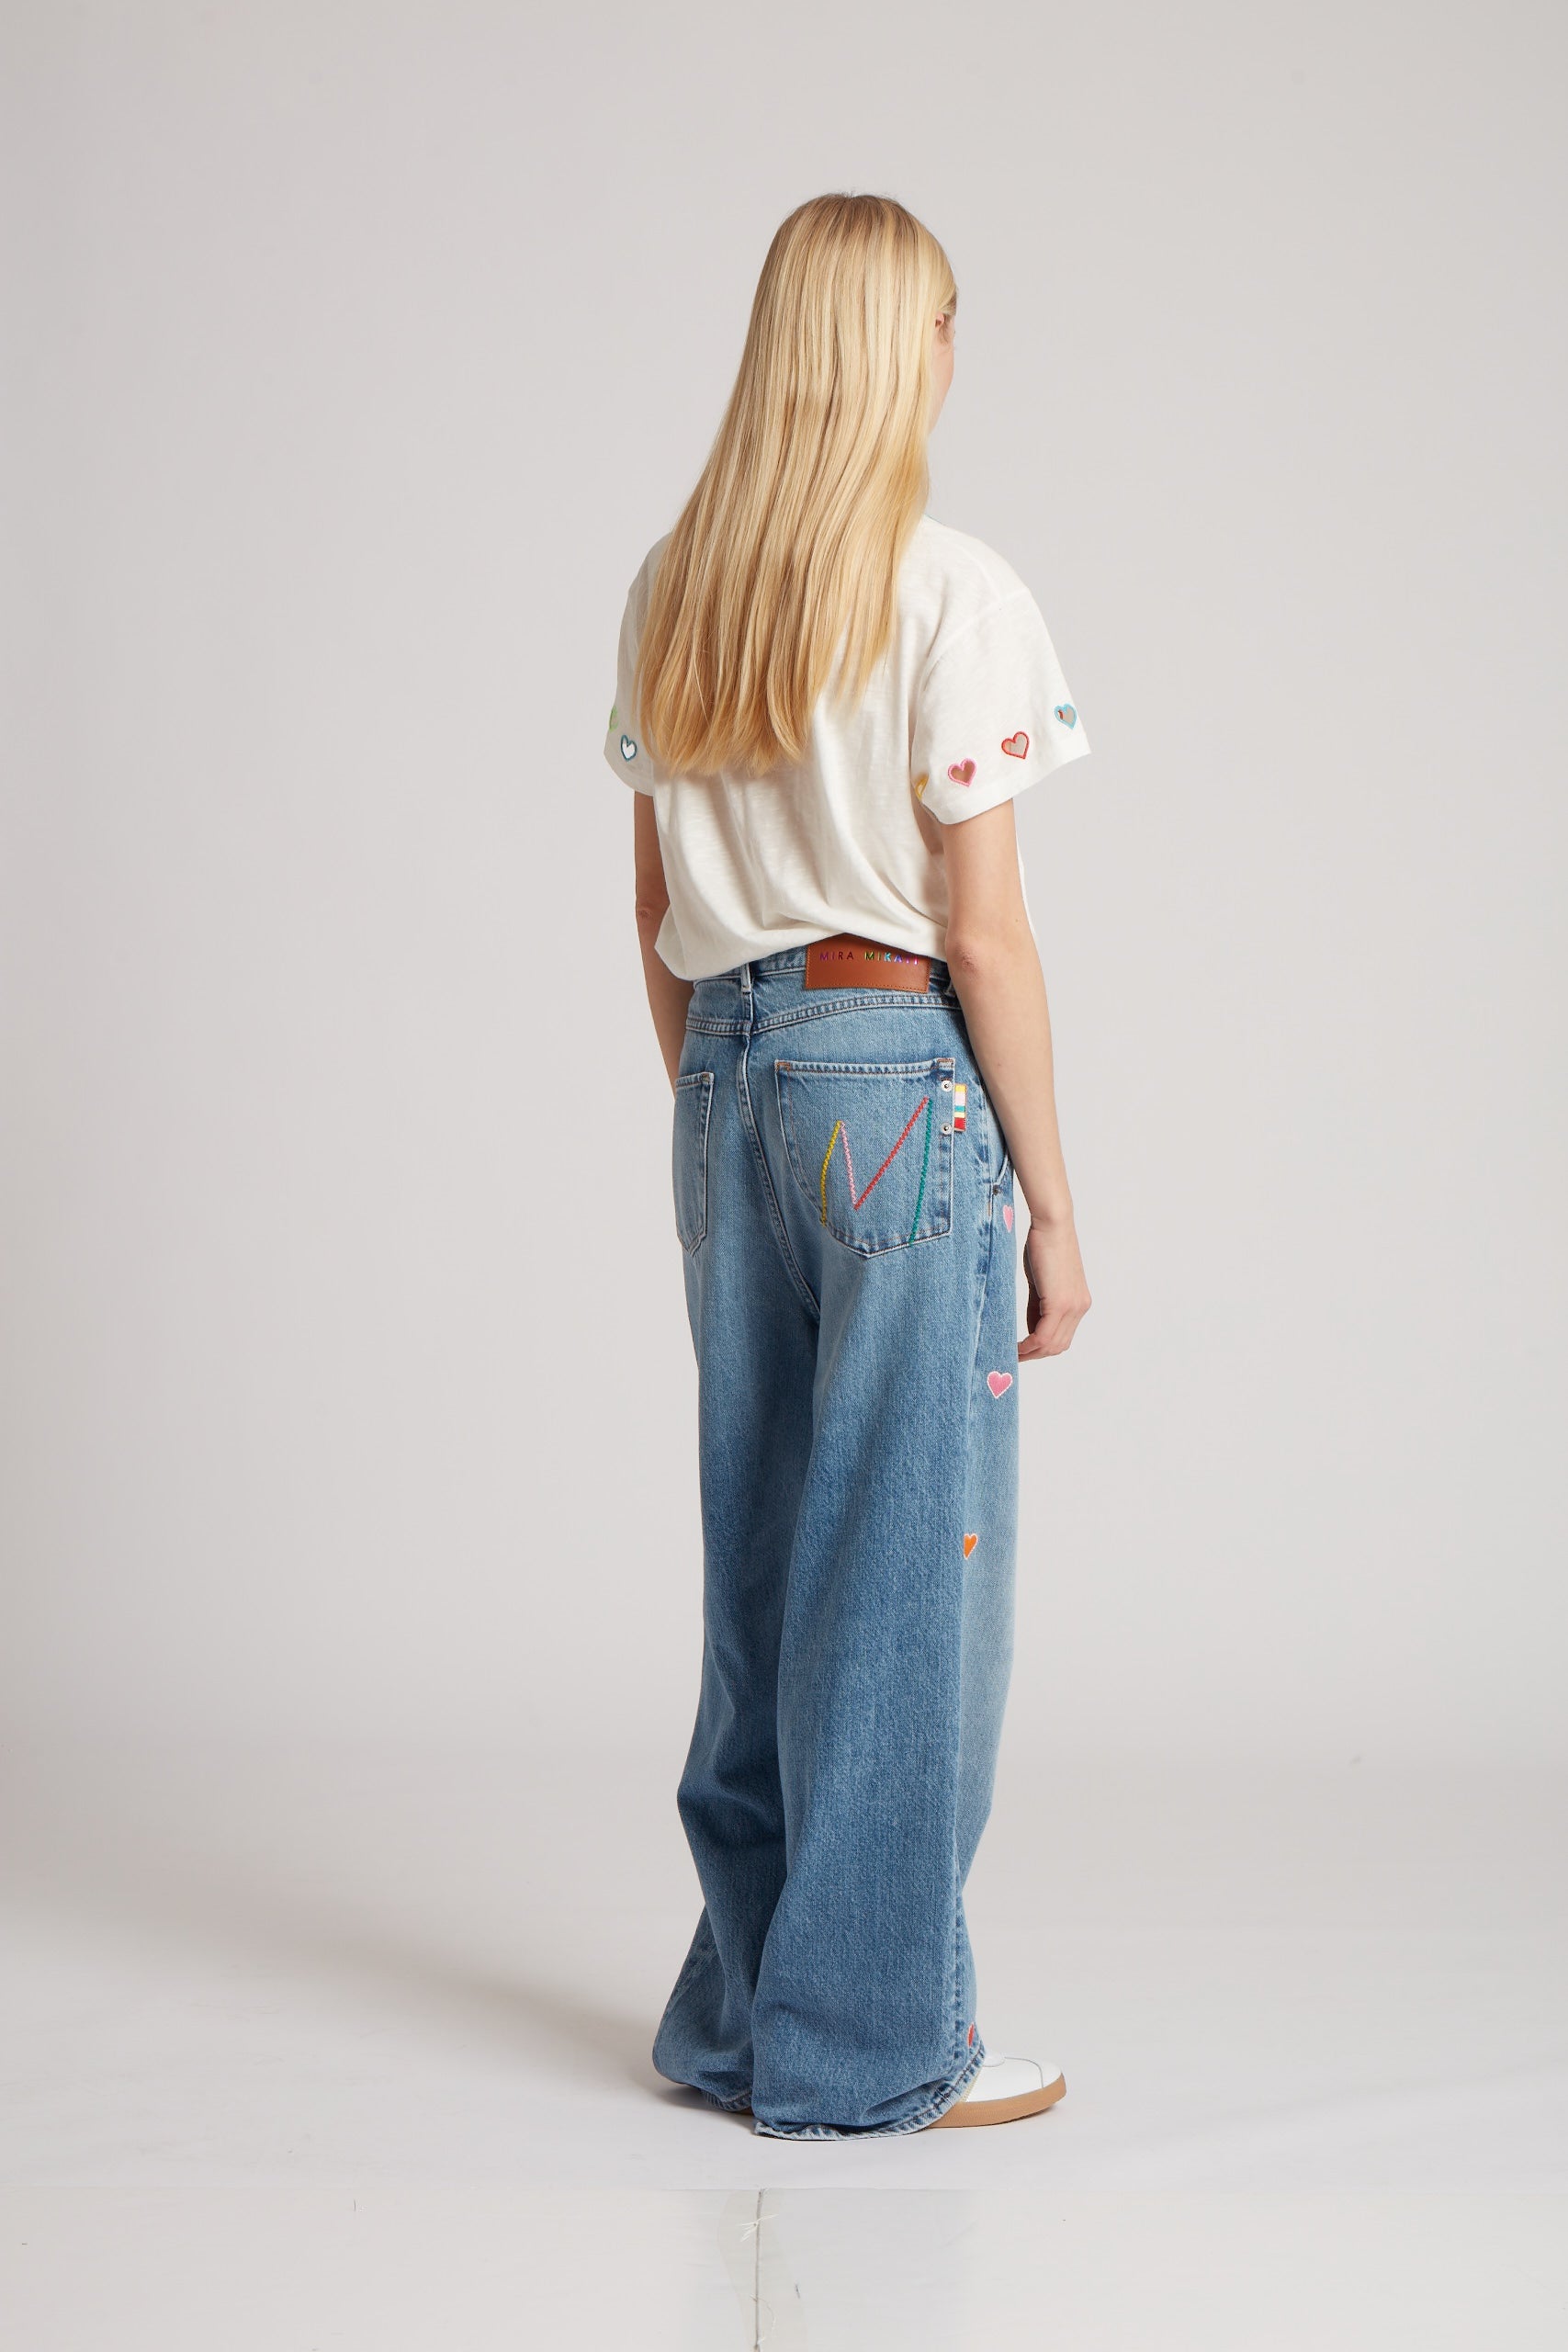 Embroidered Heart Jeans 